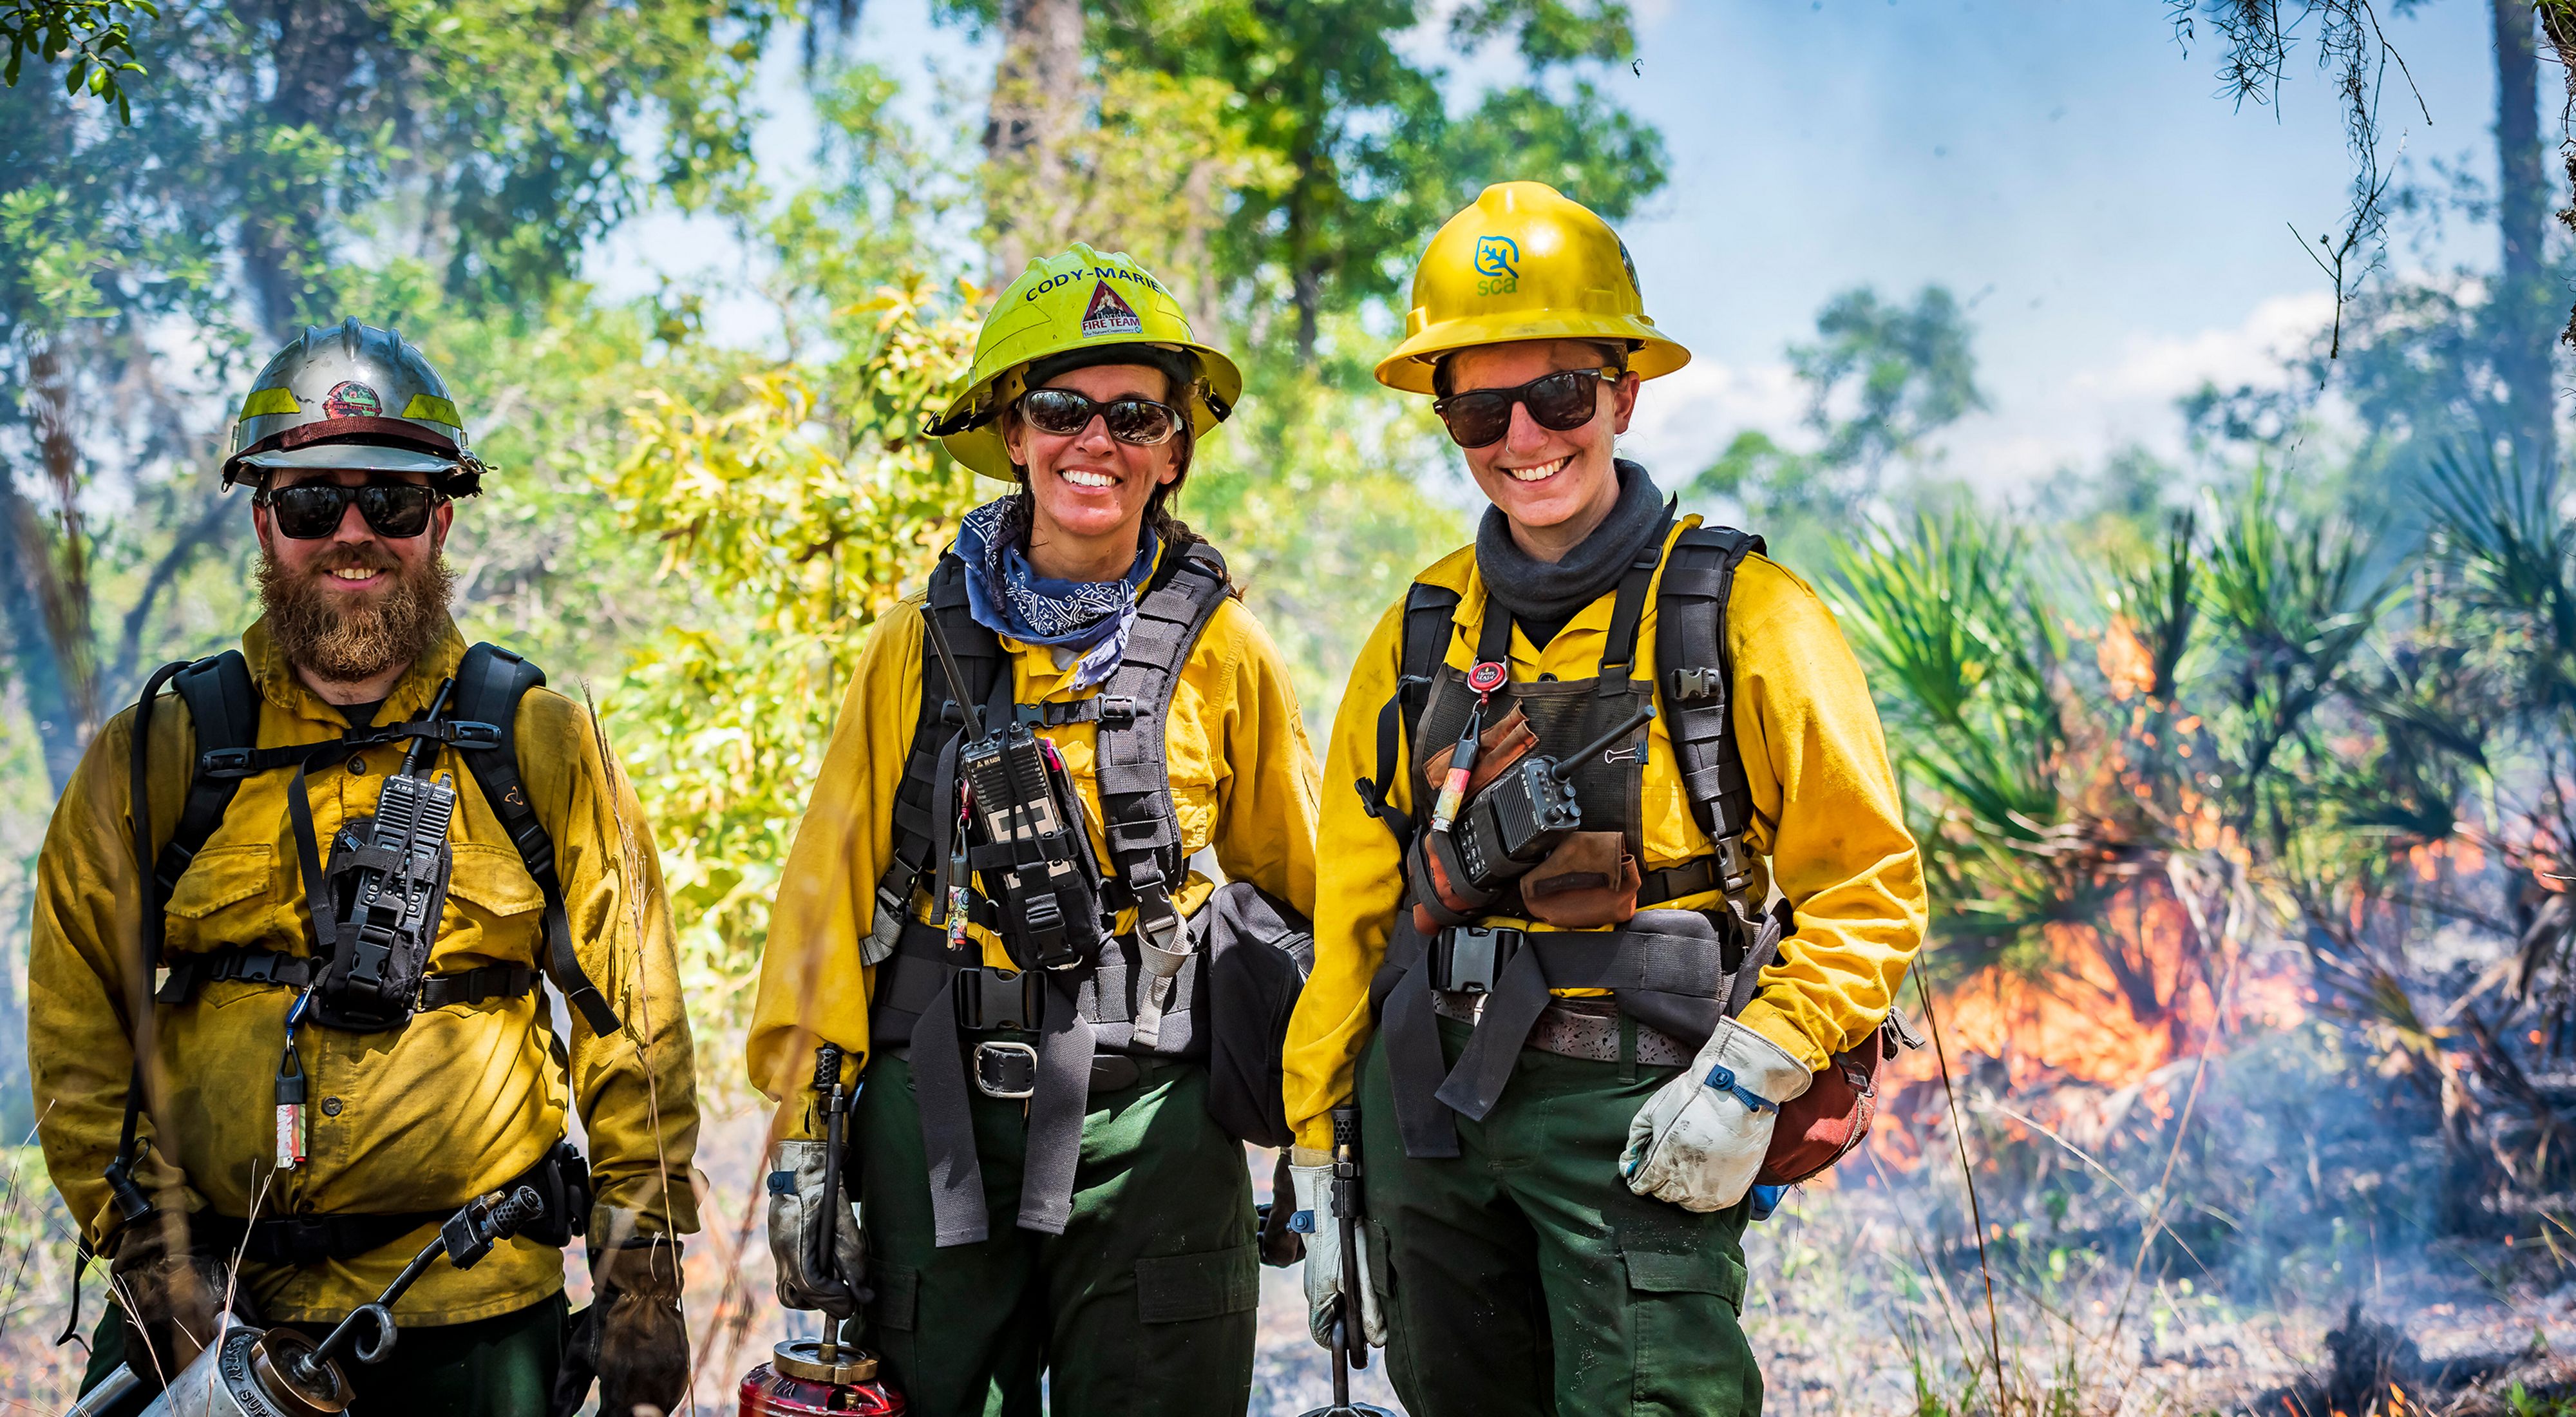 Three people in protective fire gear smile at the camera while a controlled fire burns behind them